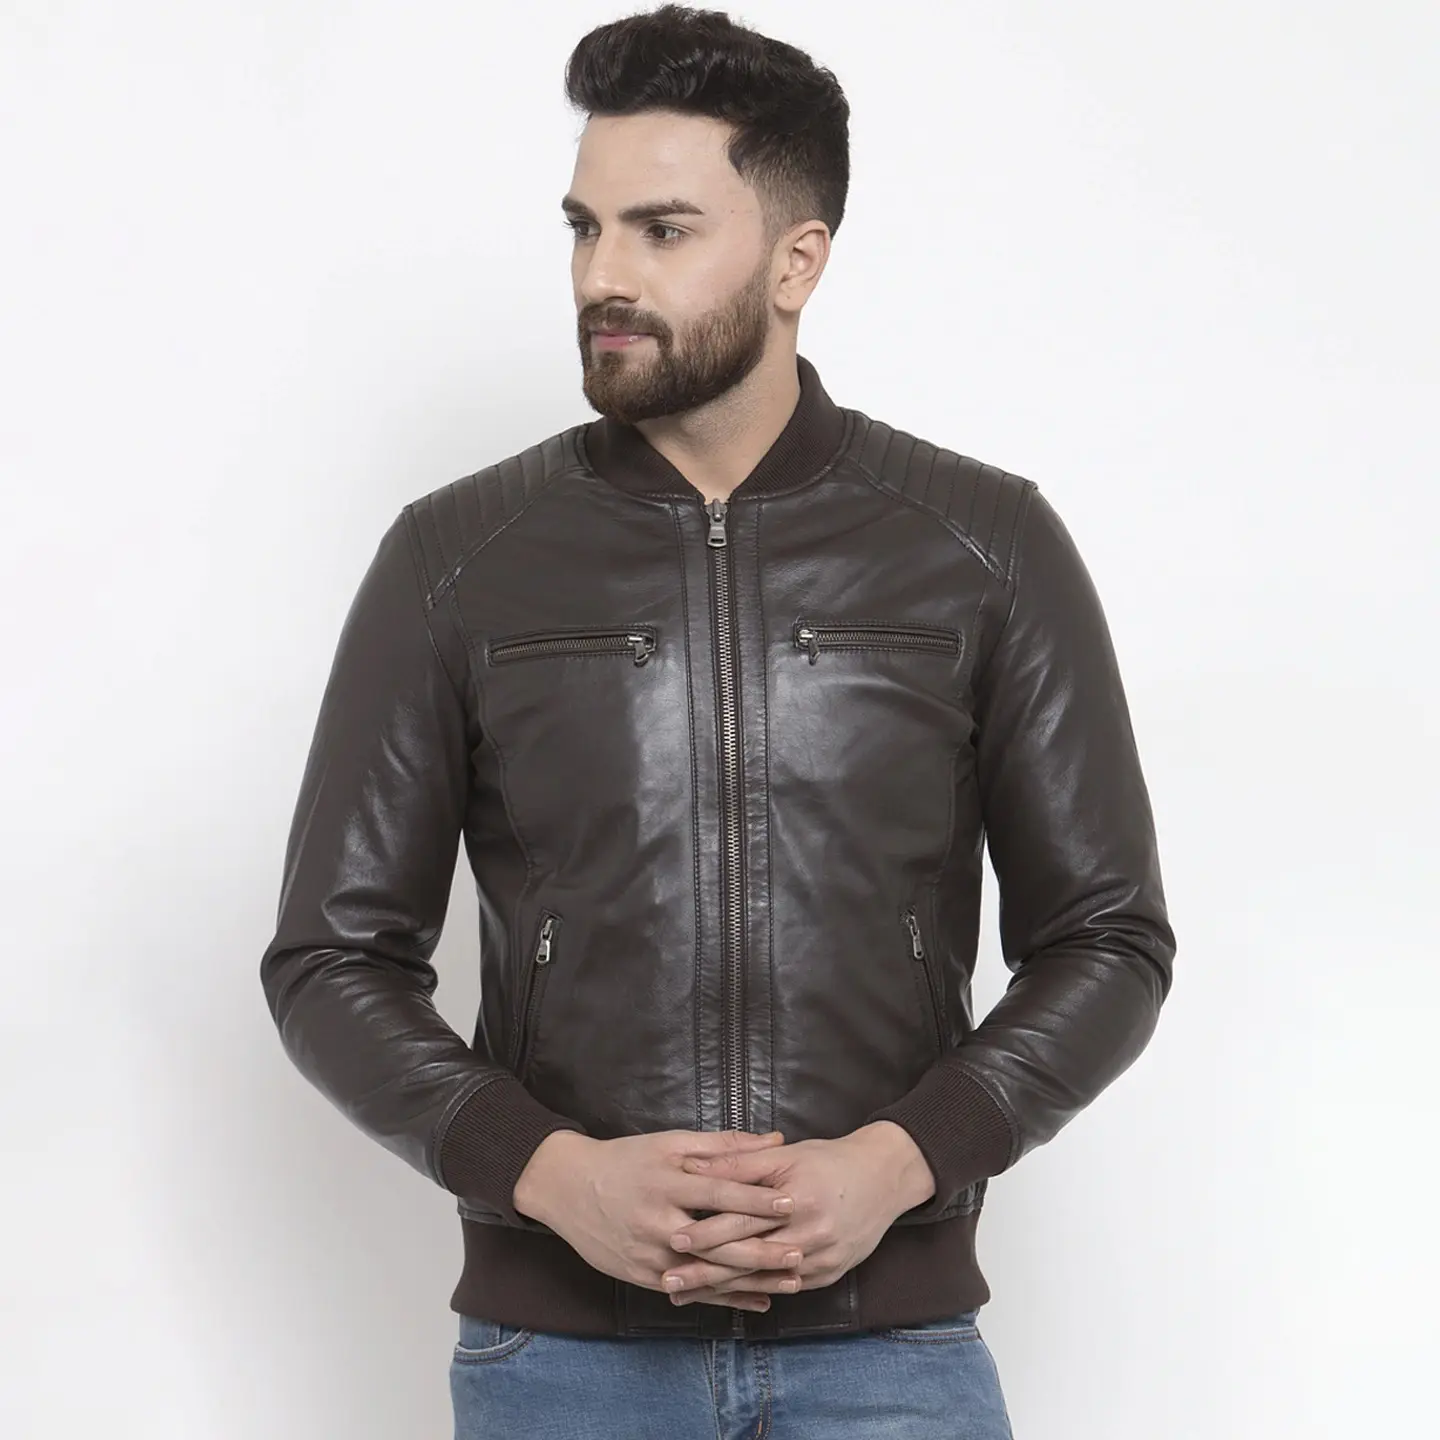 2023 Fashion Men's Leather Jackets Autumn Solid Color Jacket Popular Simple Casual Male Jacket